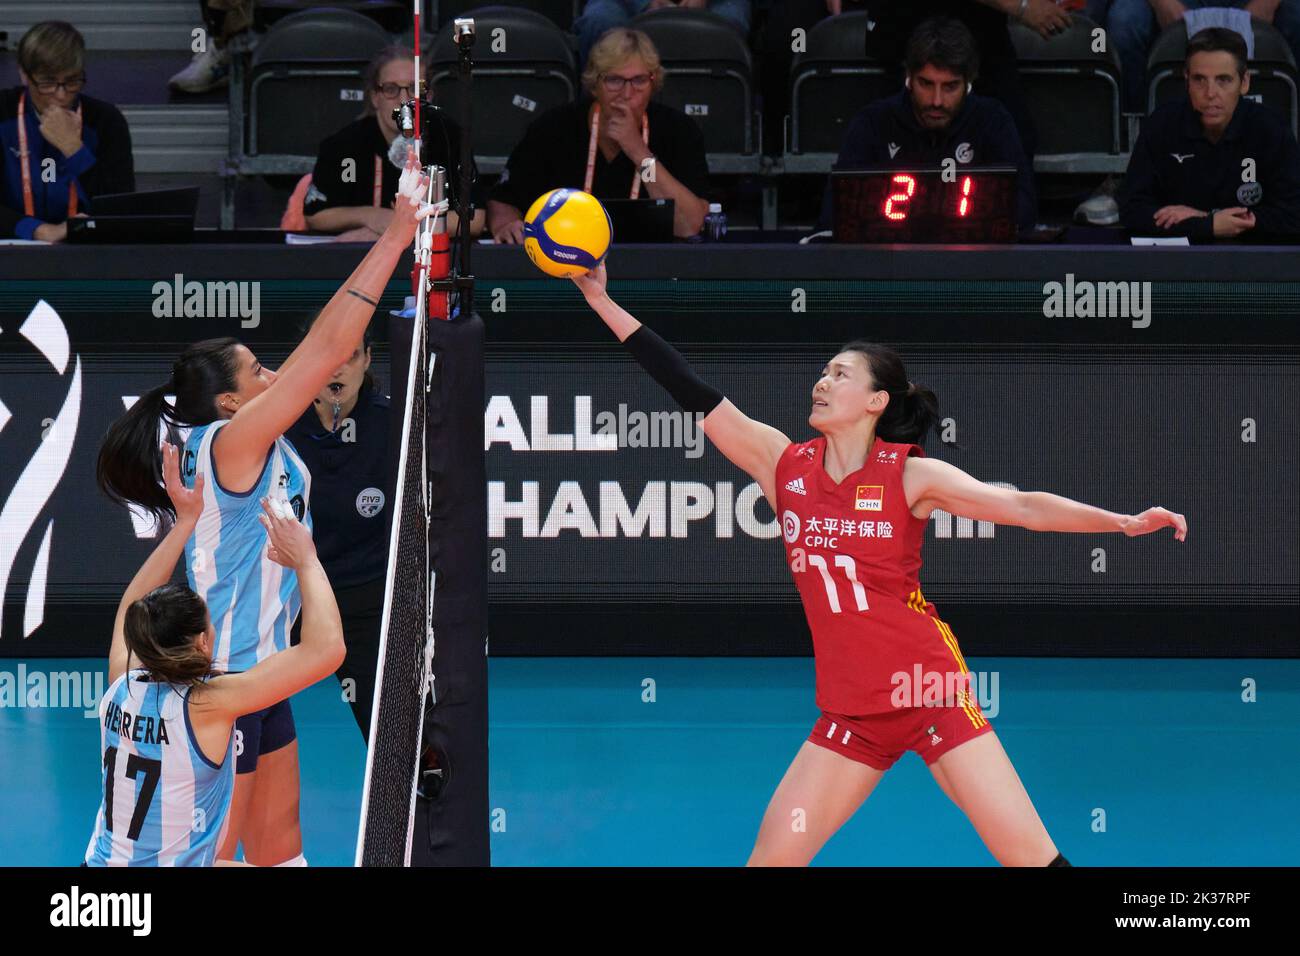 Arnhem, Netherlands. 25th Sep, 2022. Wang Yizhu (R) of China competes during the Phase 1 Pool D match between China and Argentina during the 2022 Volleyball Women's World Championship in Arnhem, the Netherlands, Sept. 25, 2022. Credit: Meng Dingbo/Xinhua/Alamy Live News Stock Photo